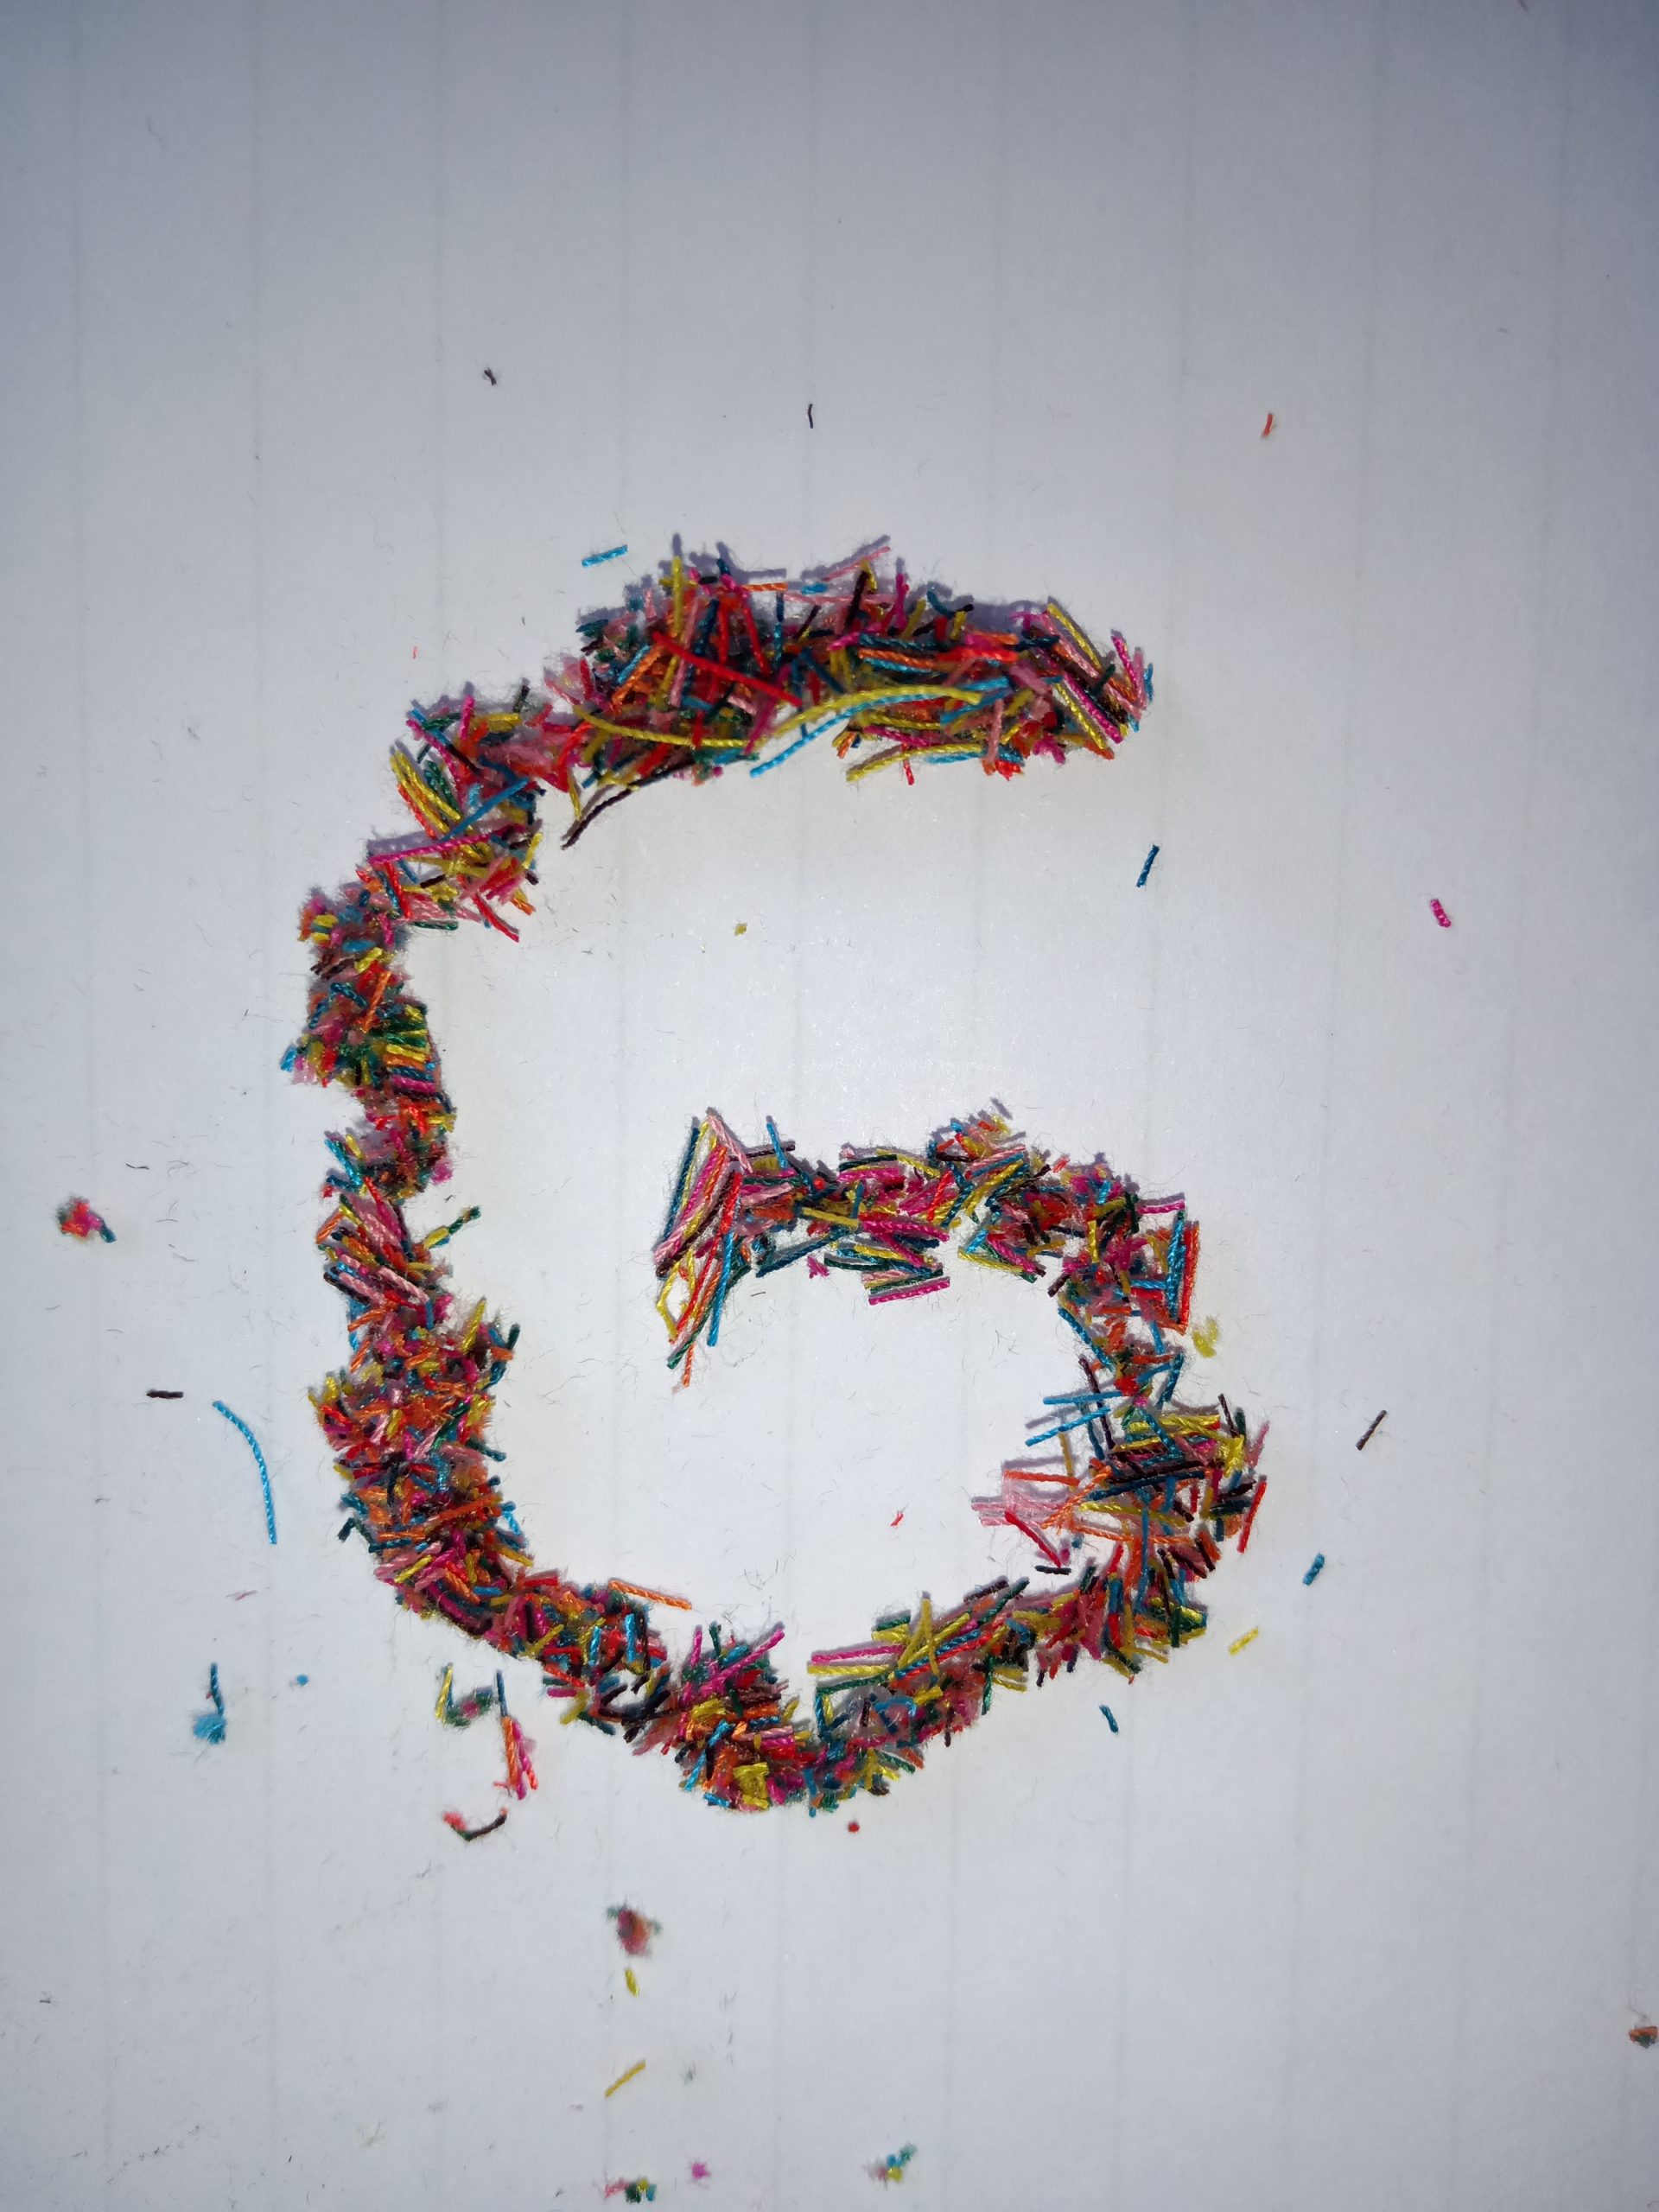 Google logo made with waste